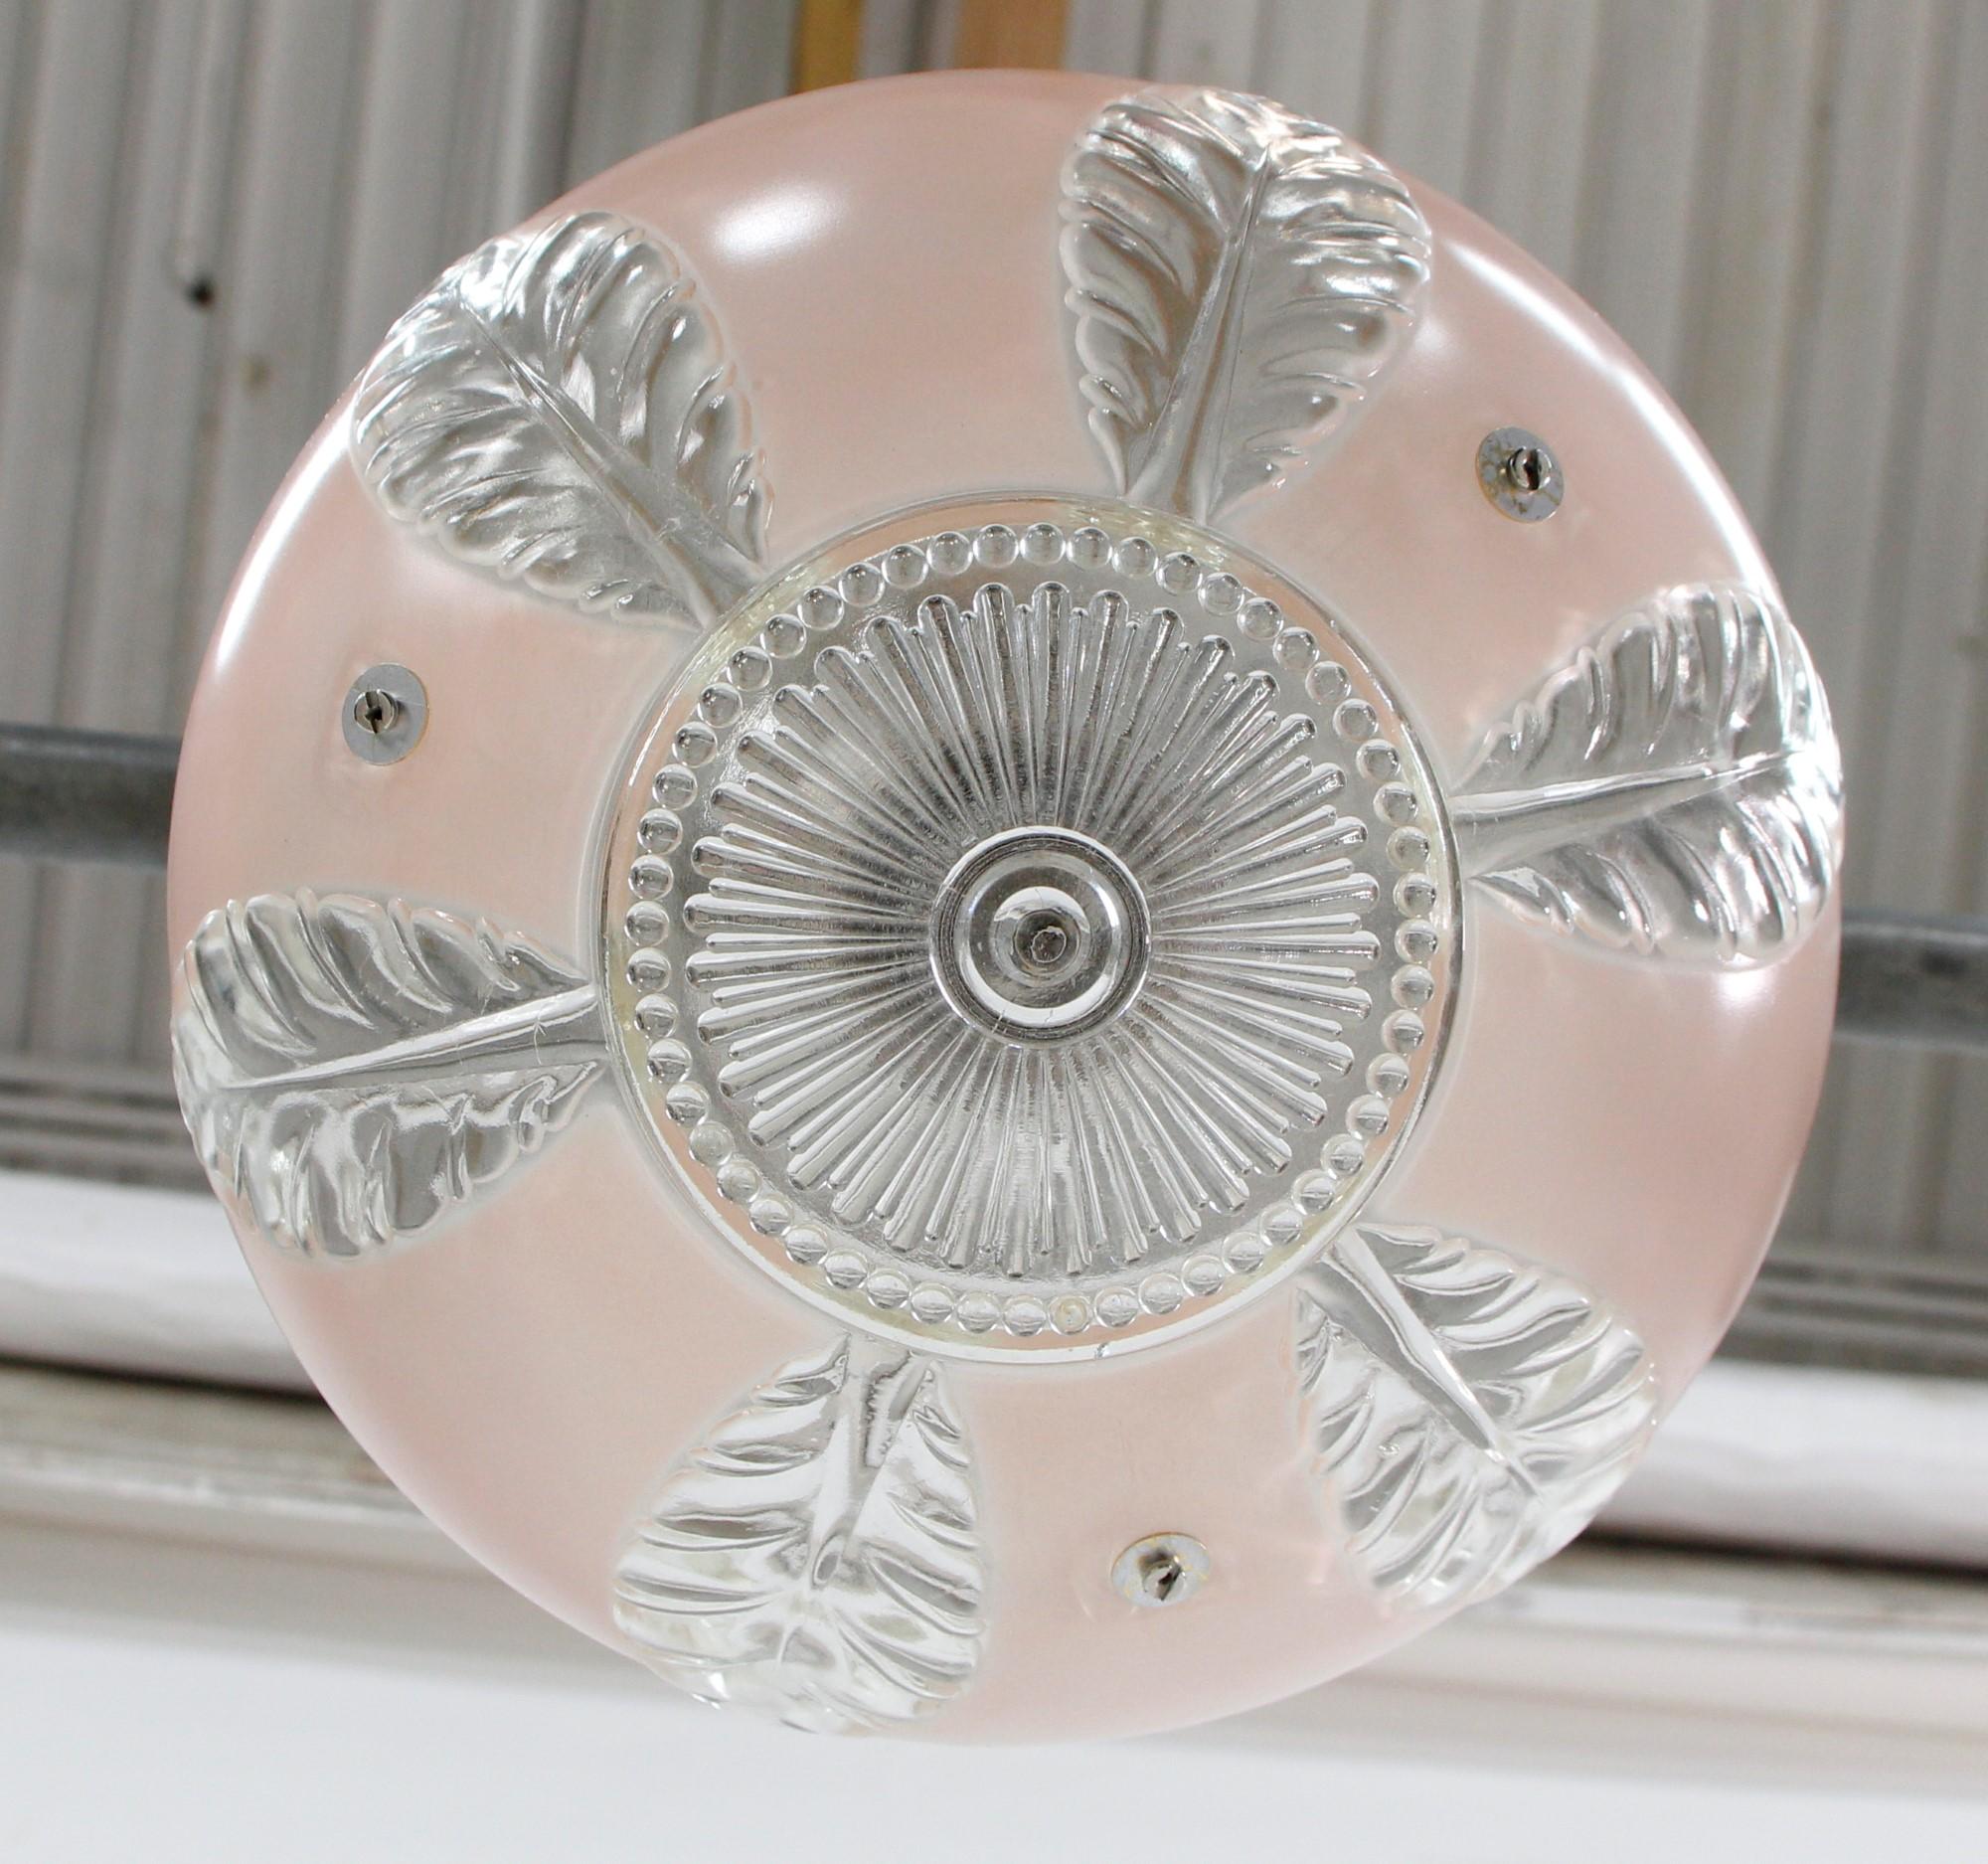 Polished Semi-Flush Mount Light Pink Dish Clear Glass Leaf Motif & Nickel Plated Fitter